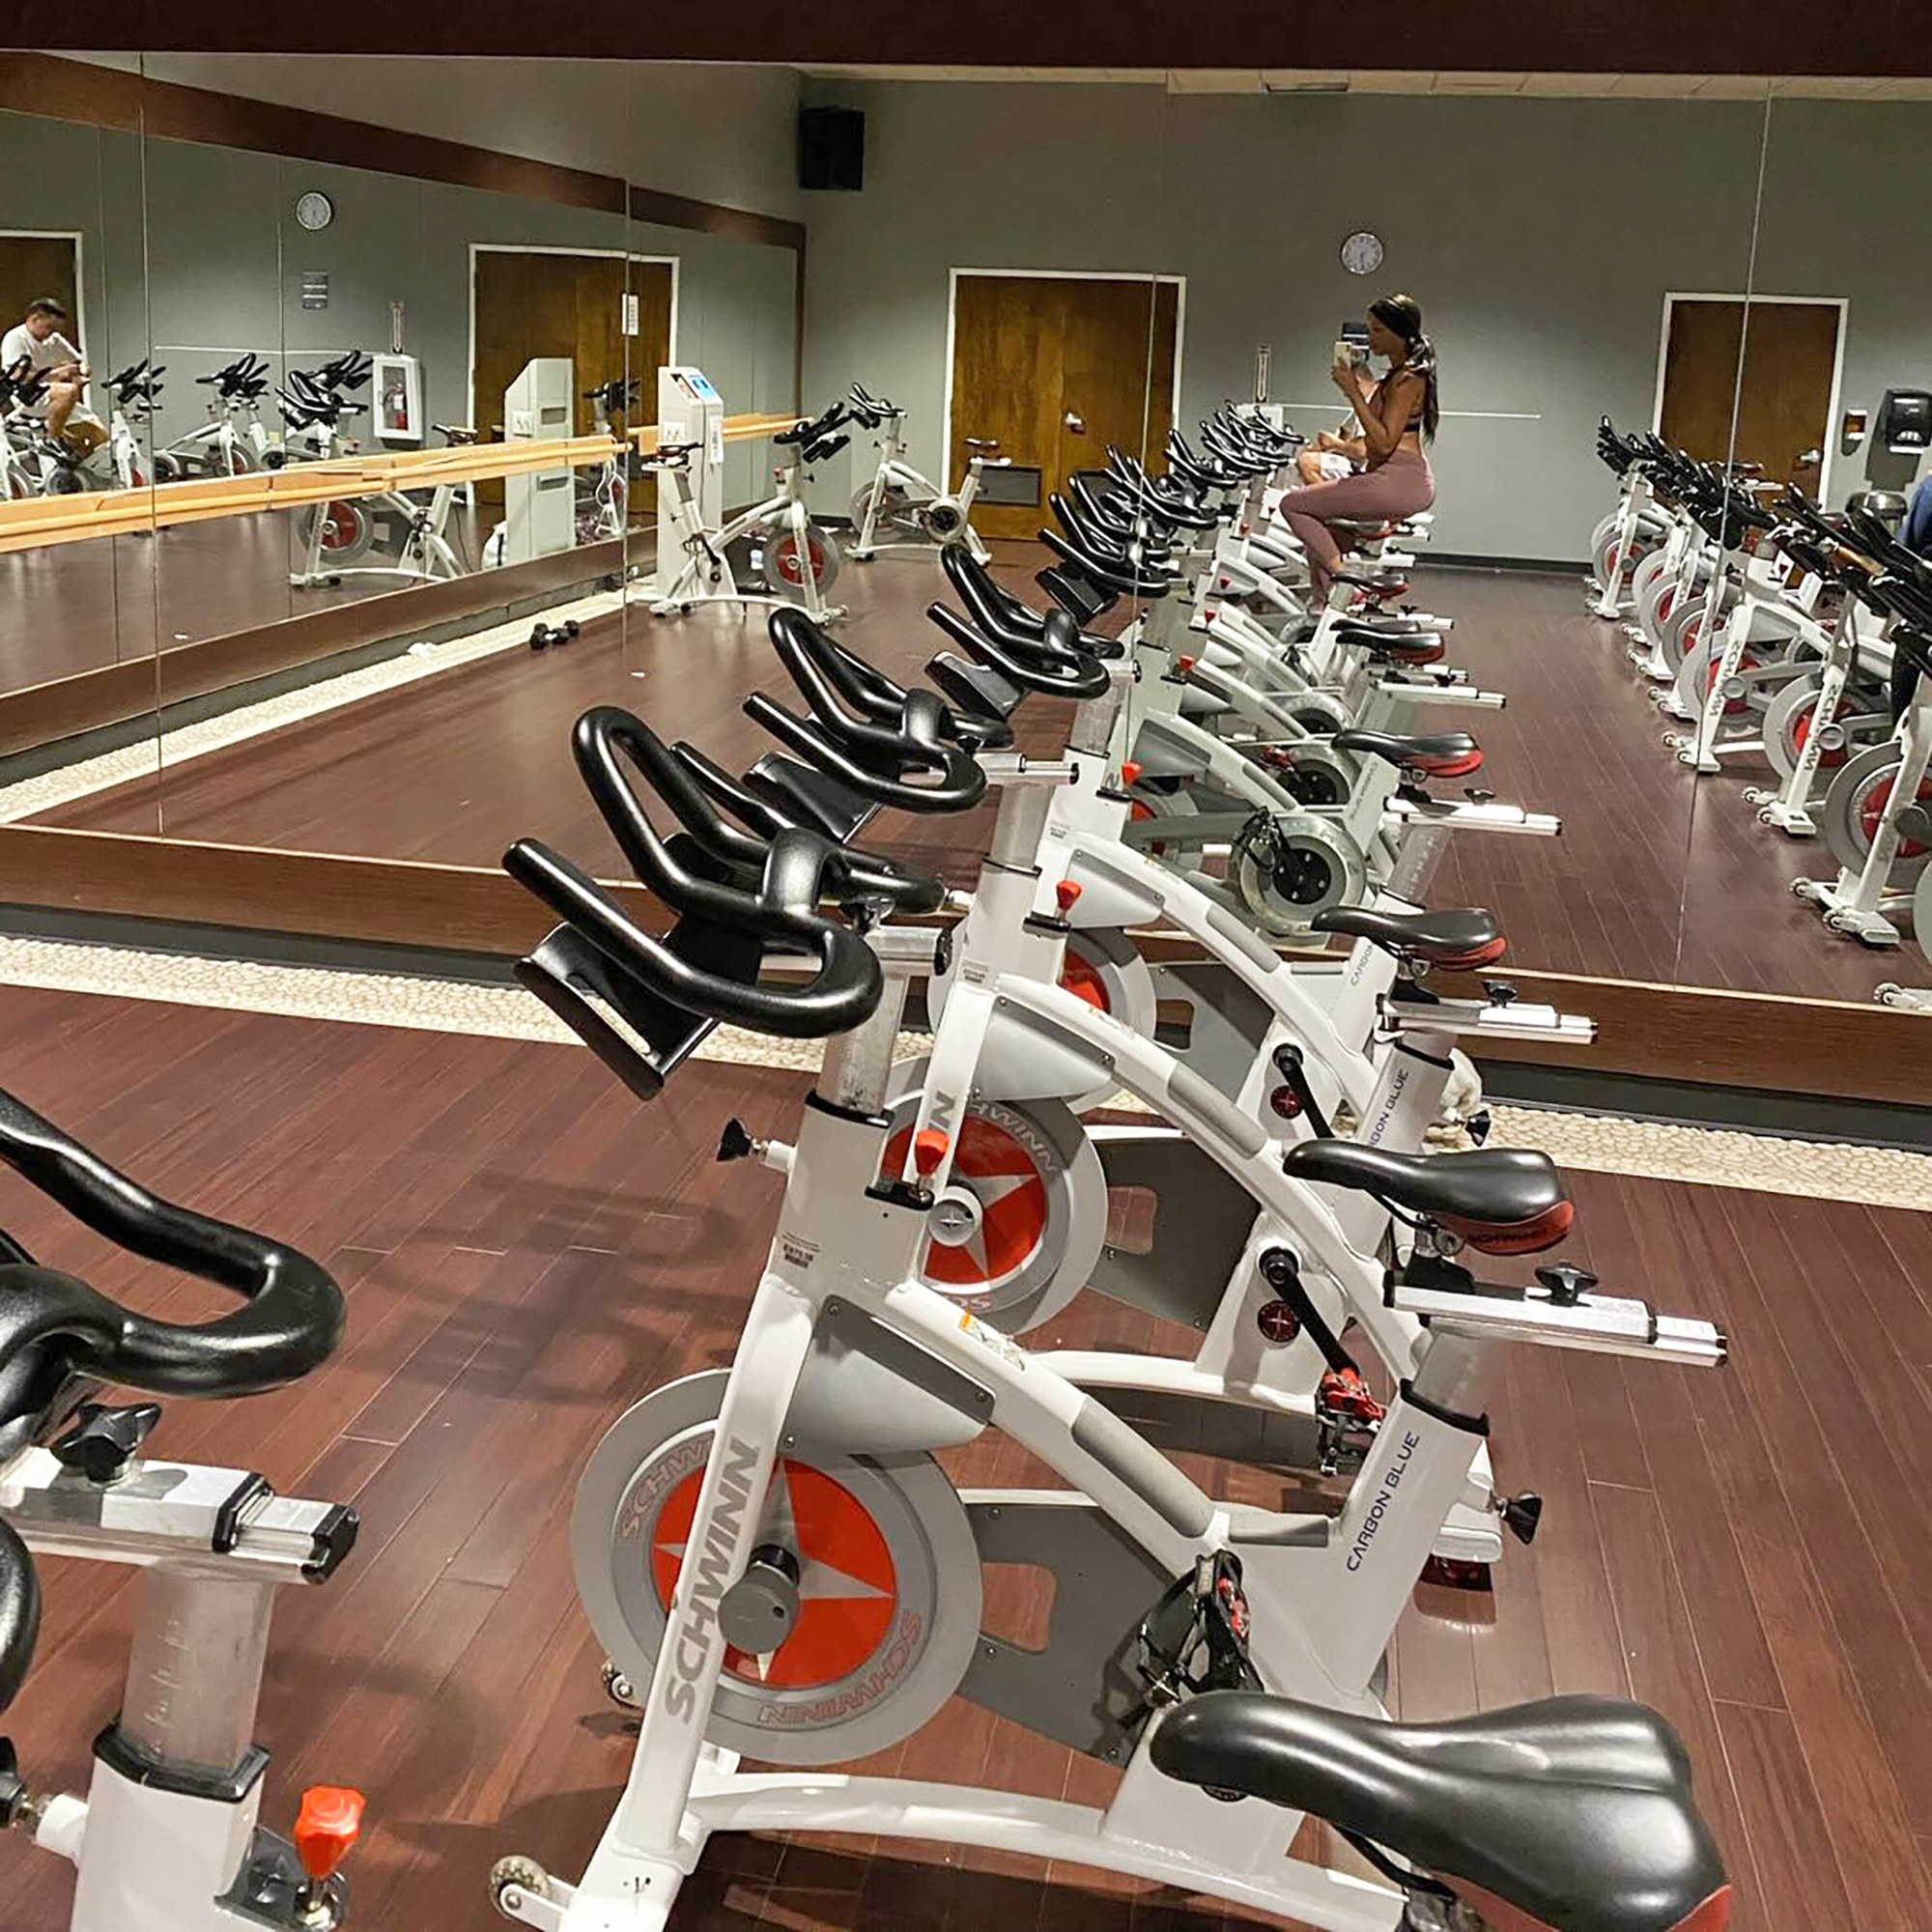 Are spin classes beneficial for cyclists? To spin or not to spin, that is  the question